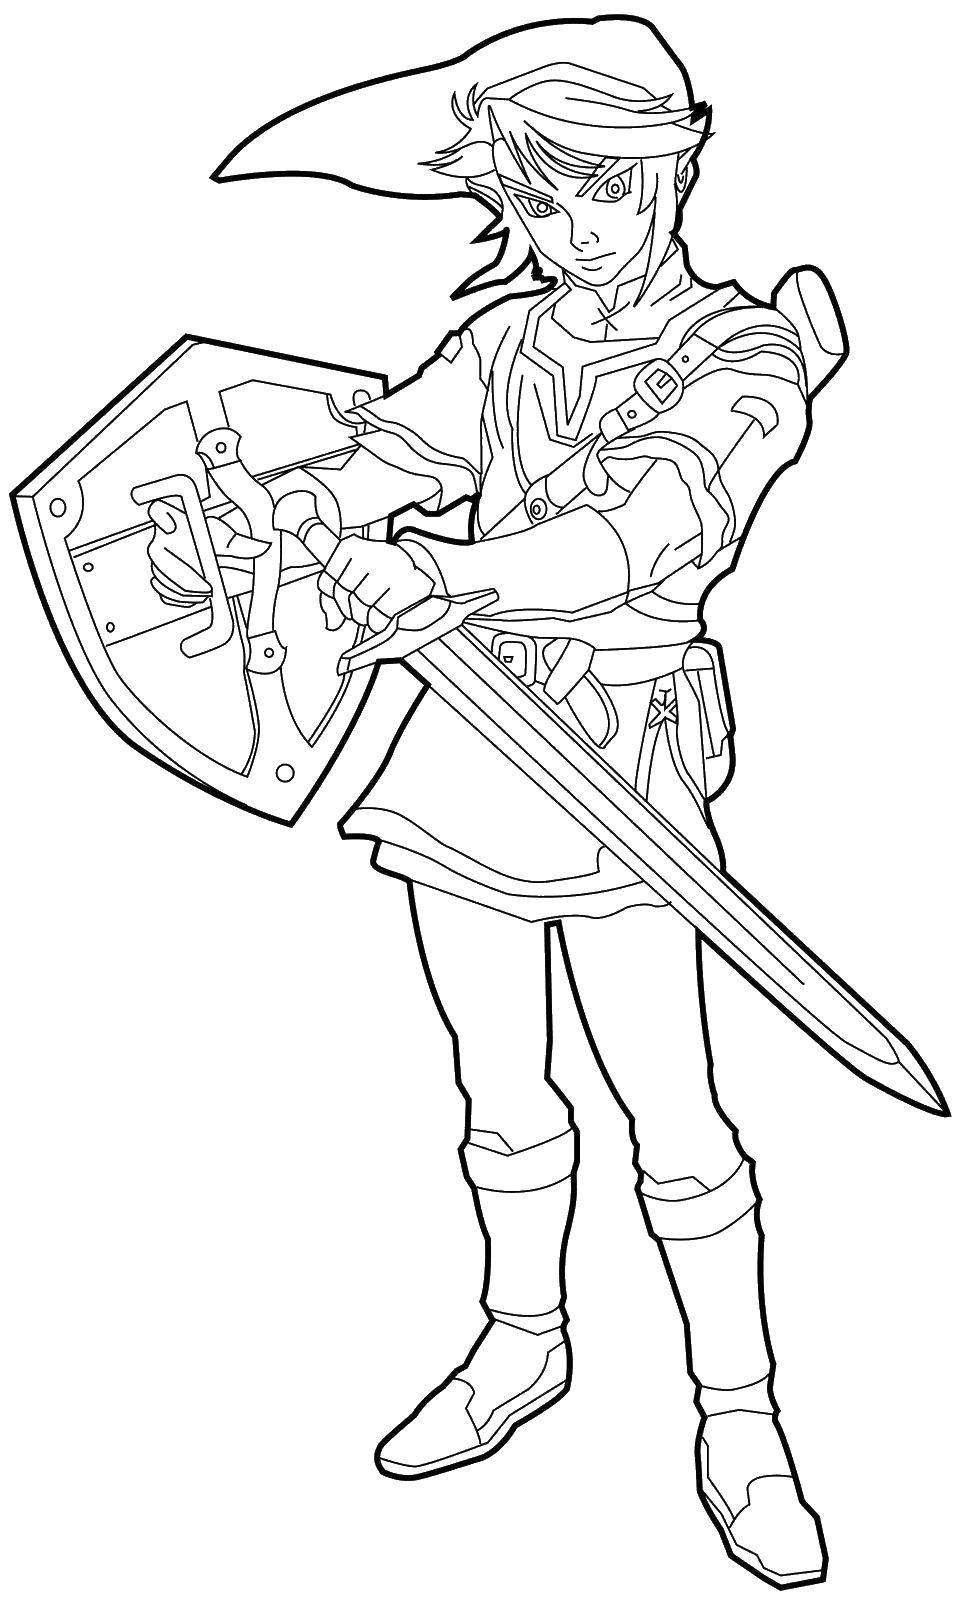 Coloring Beautiful knight. Category Knights . Tags:  knights , armor.